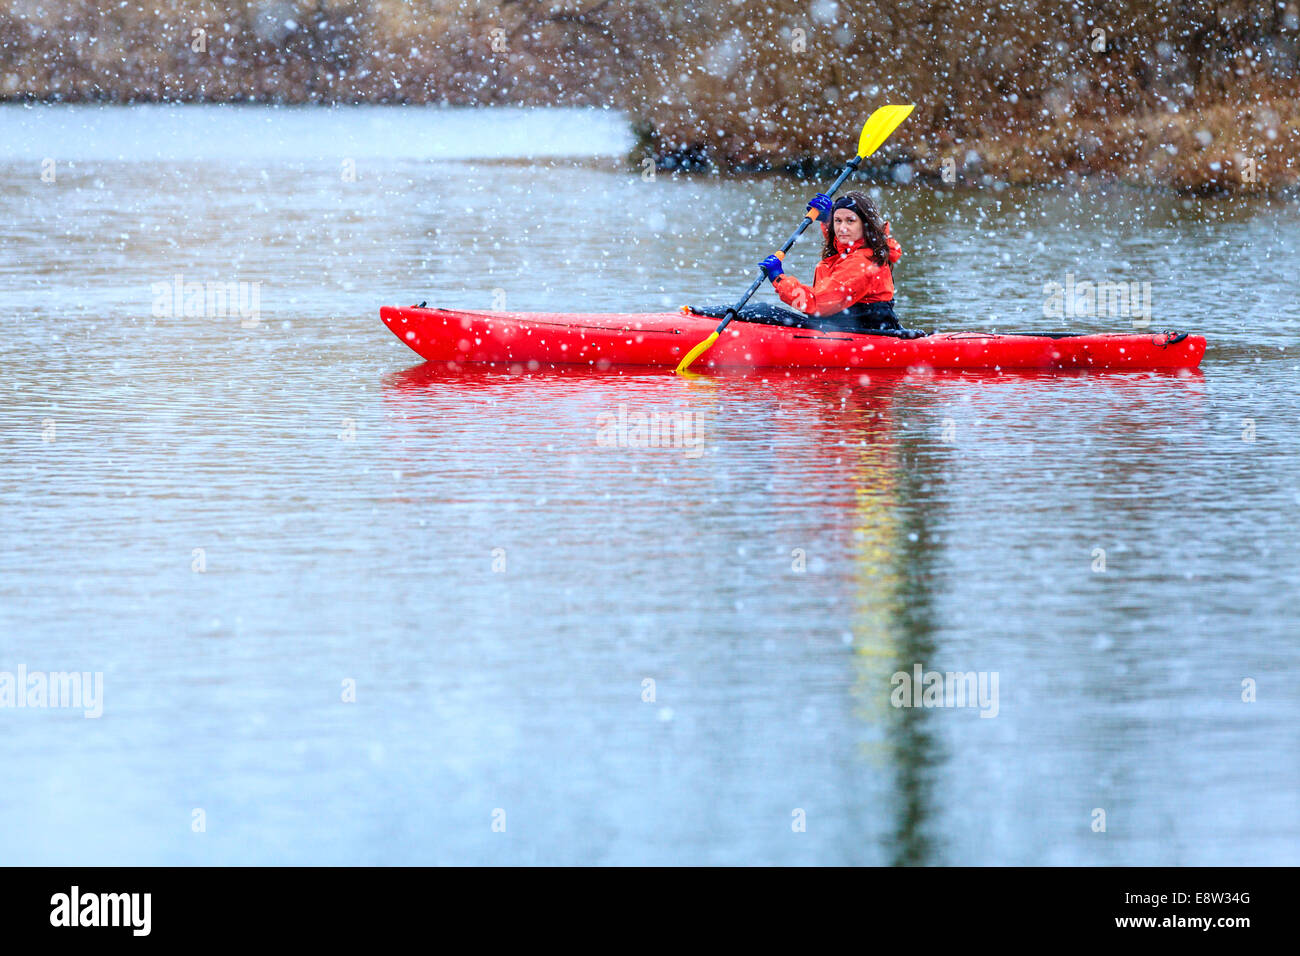 Woman is kayaking on a lake under heavy snow Stock Photo